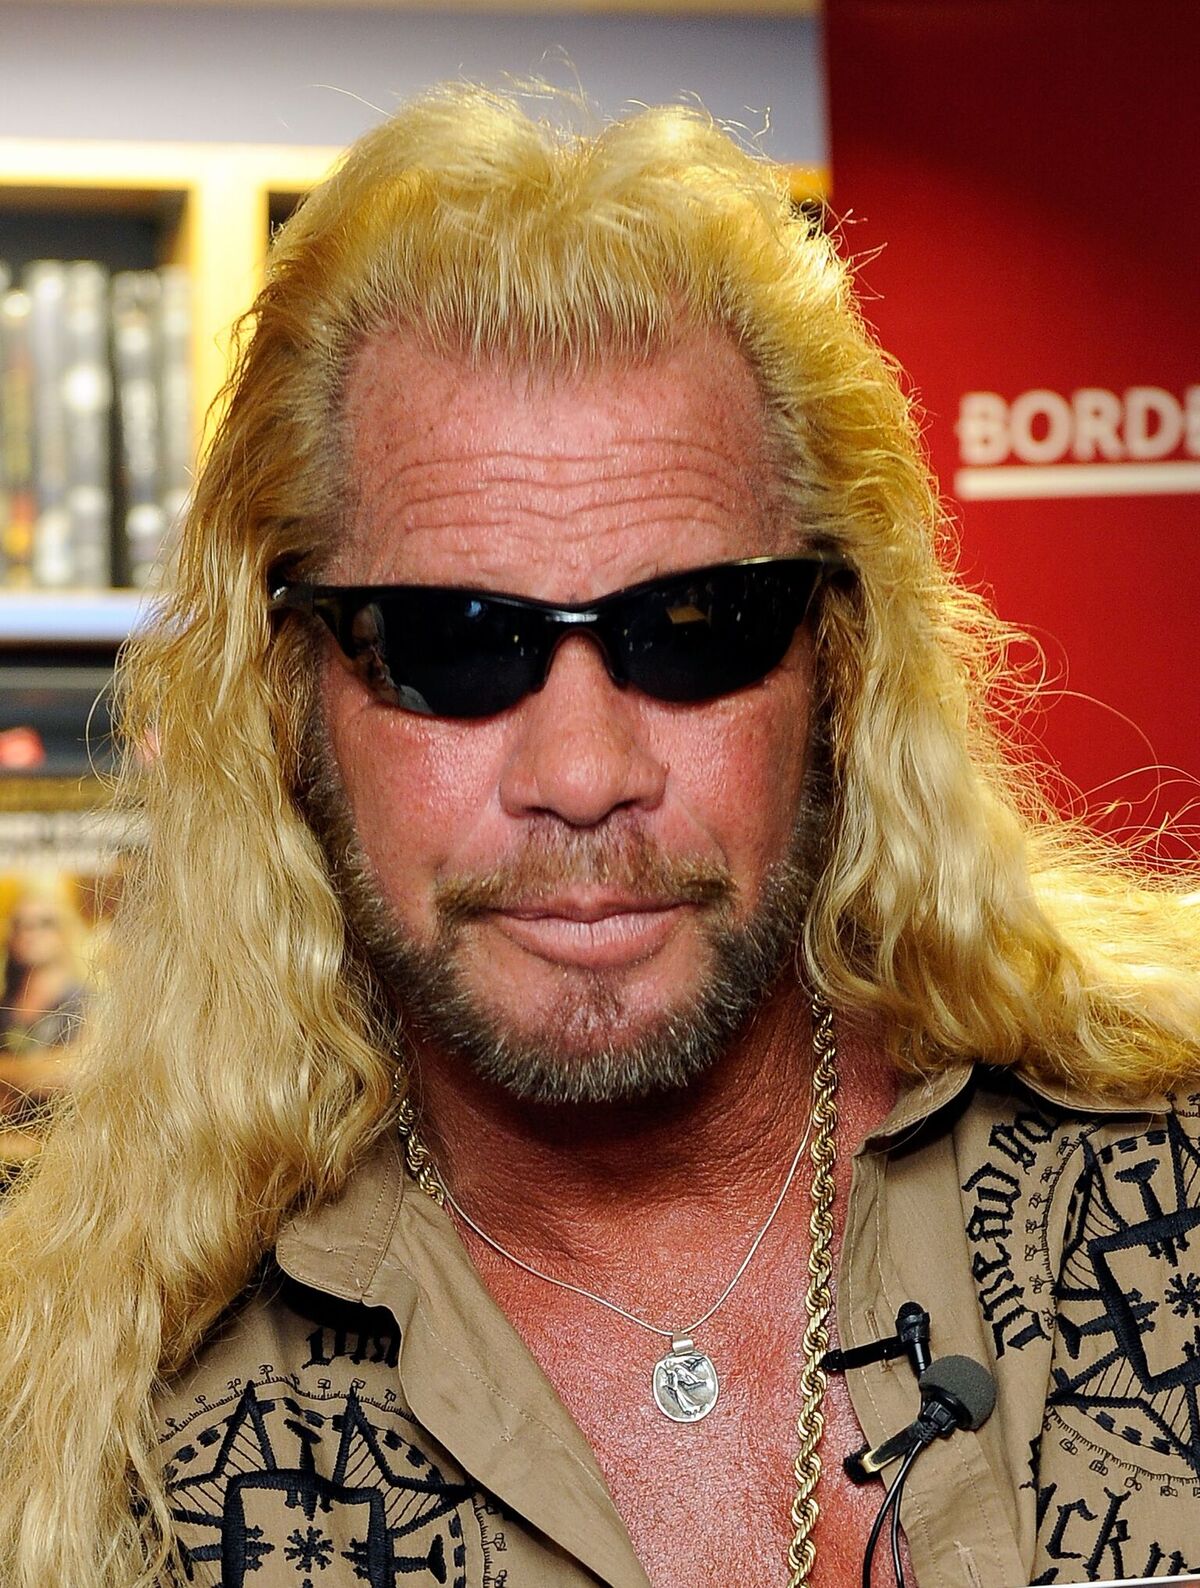 Duane Chapman promotes his book "When Mercy Is Shown, Mercy Is Given" at Borders Wall Street on March 19, 2010 in New York City | Photo: Getty Images